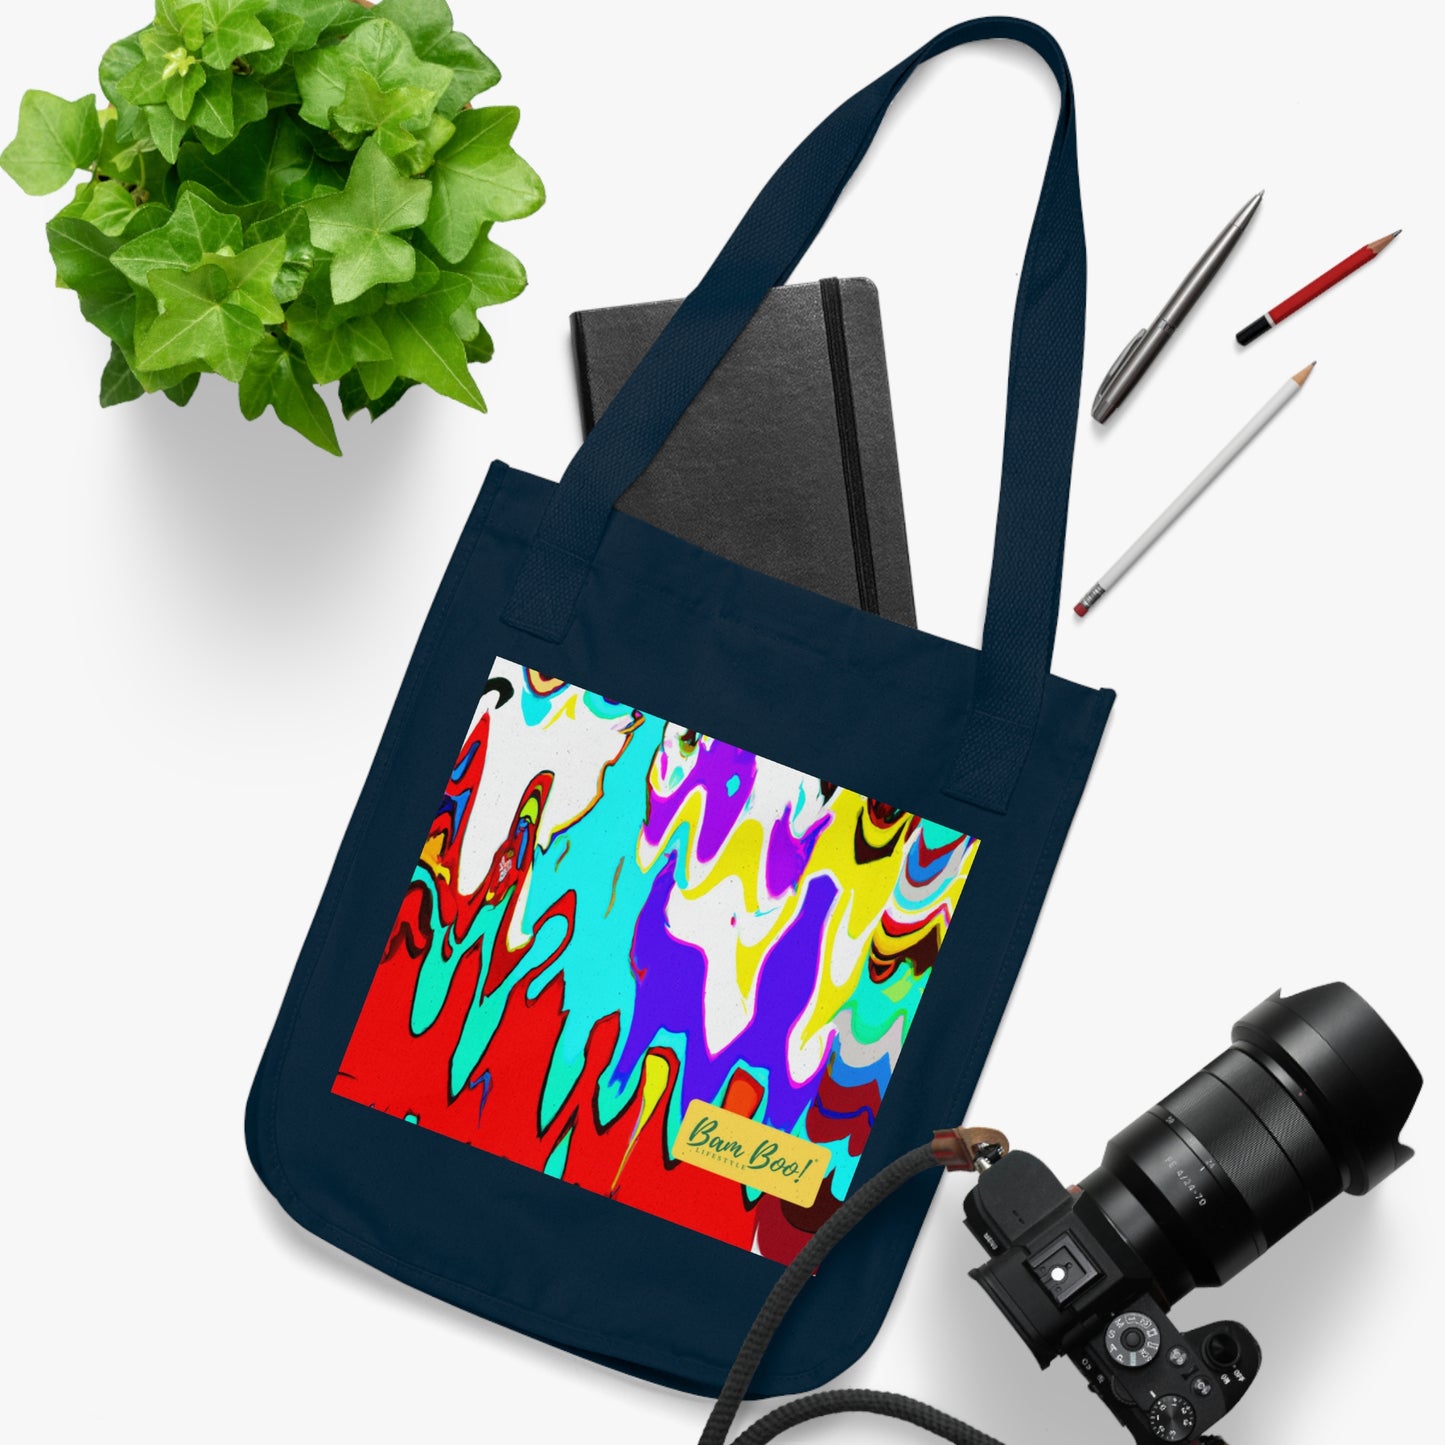 "A Burst of Colors: Reflecting on Life's Perspective" - Bam Boo! Lifestyle Eco-friendly Tote Bag